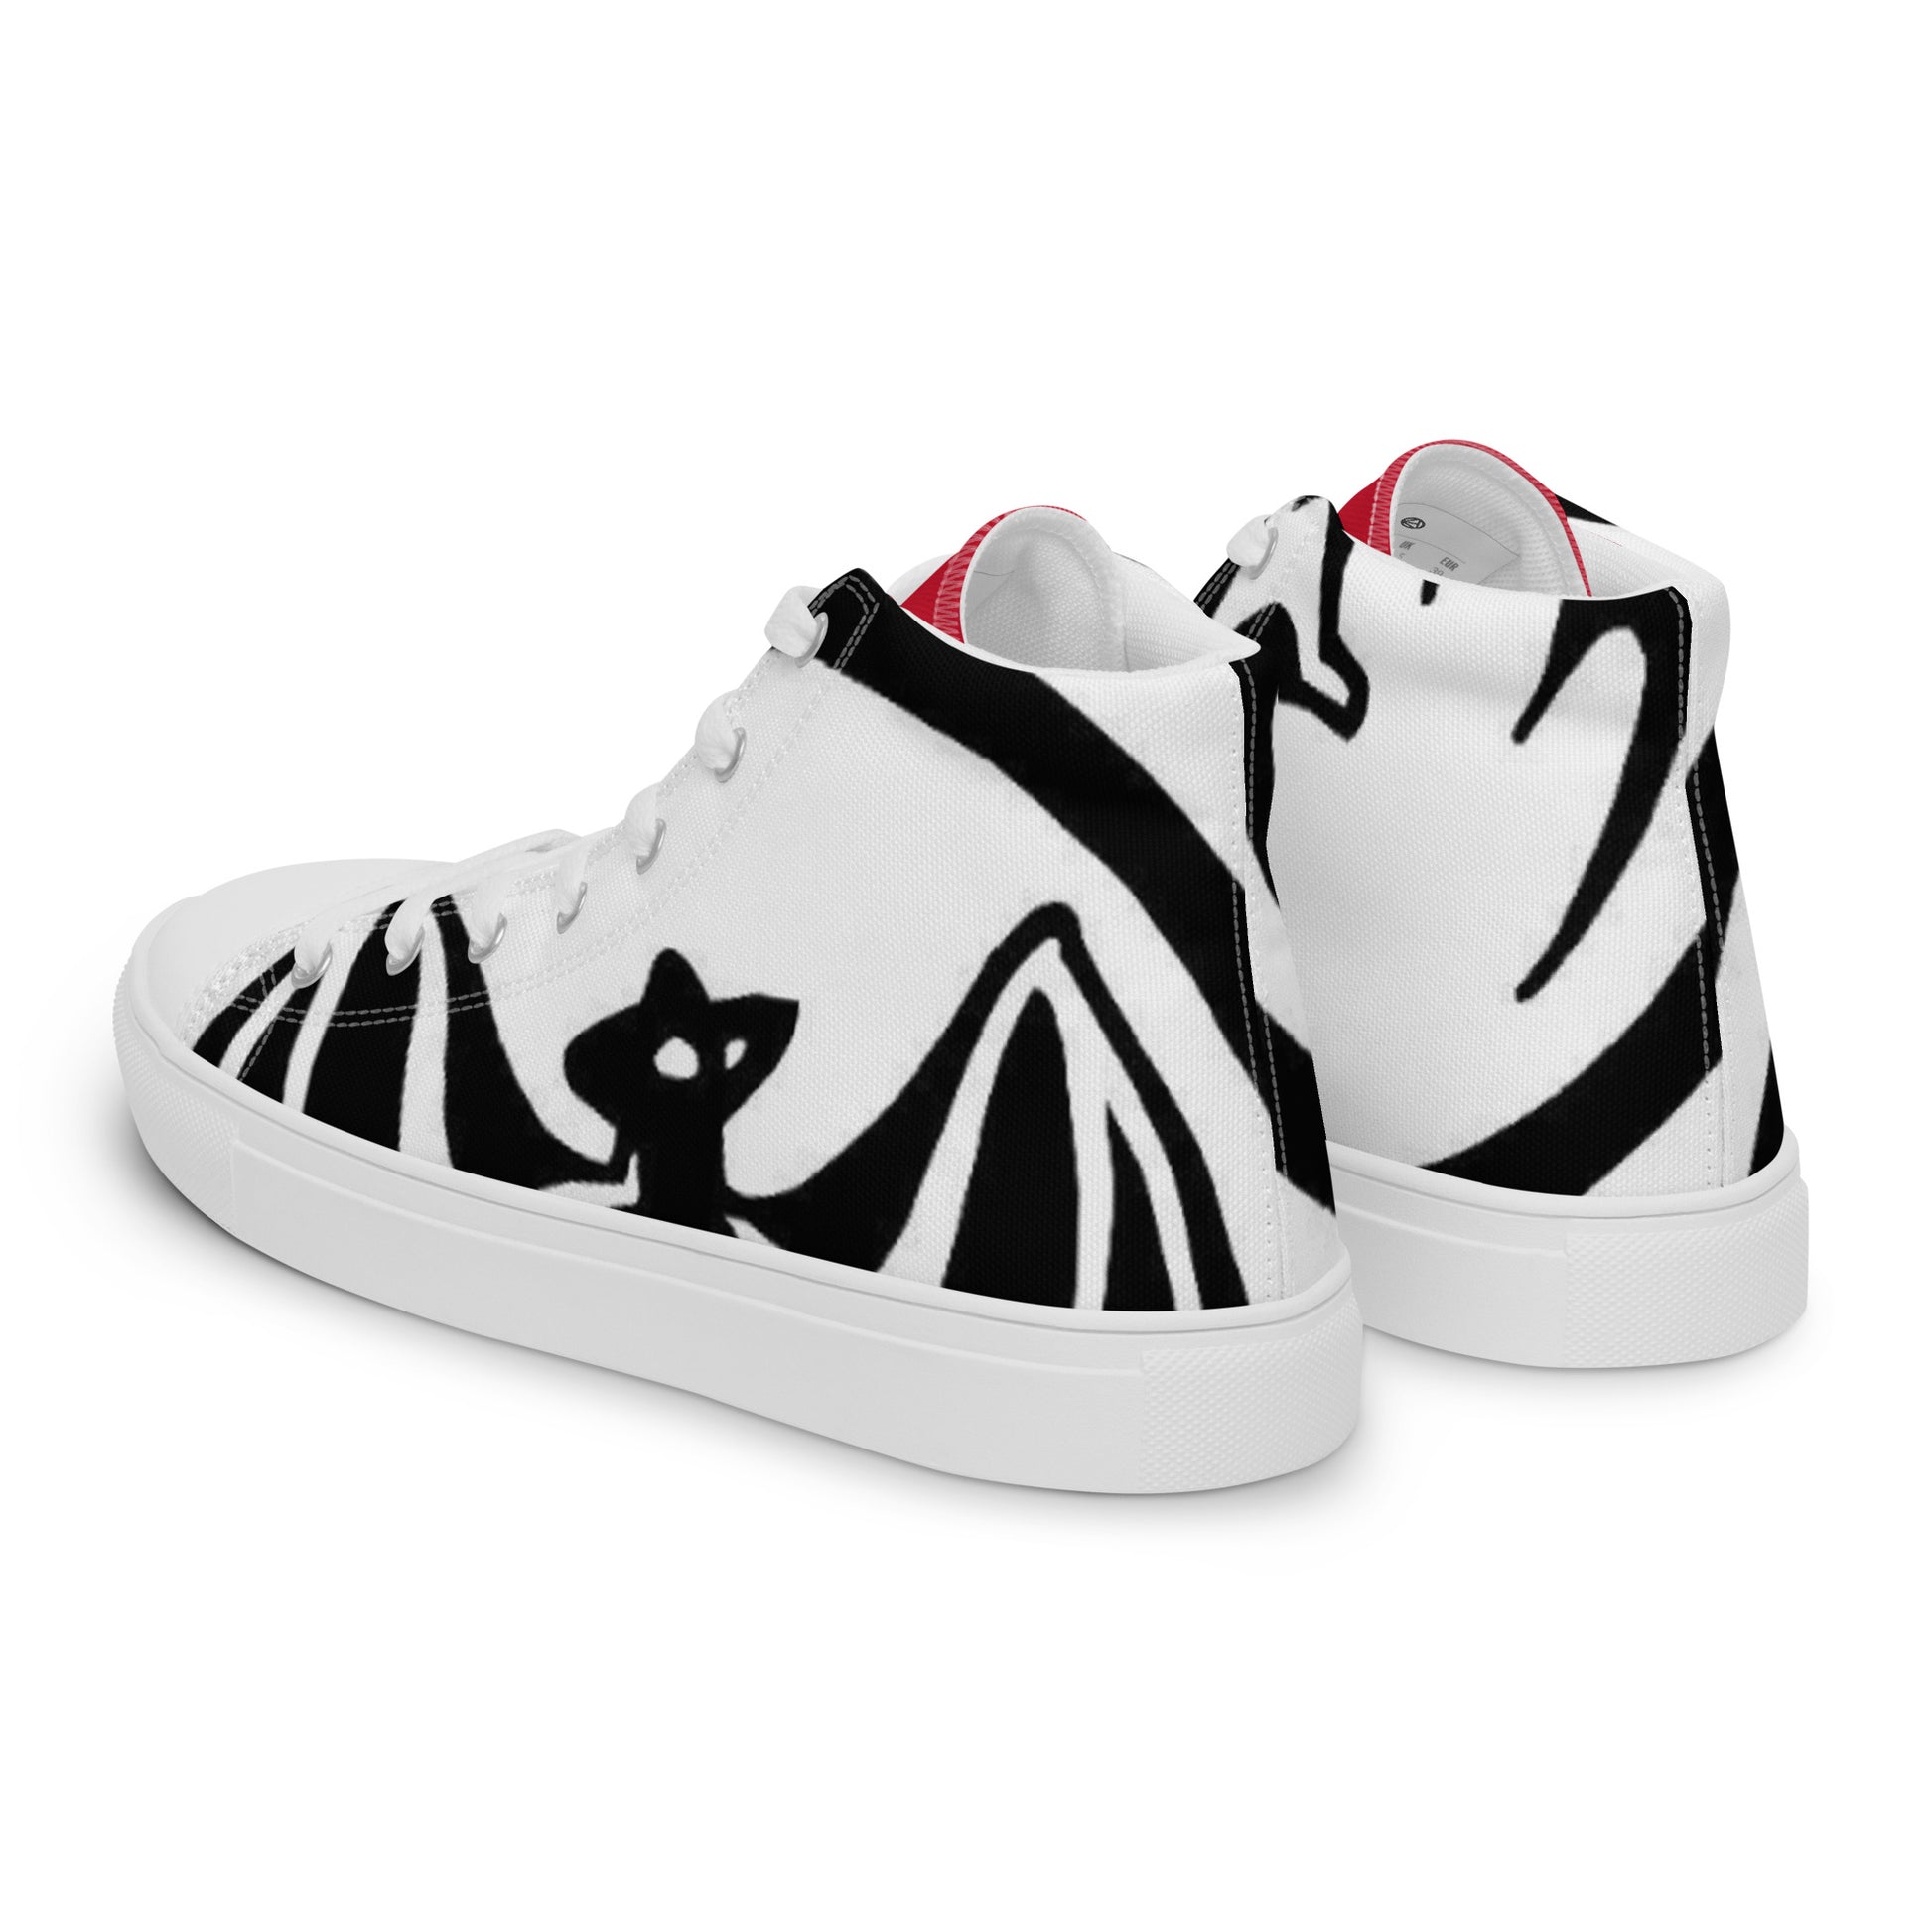 TIME OF VIBES - Men’s High Sneaker BACS - €159.00